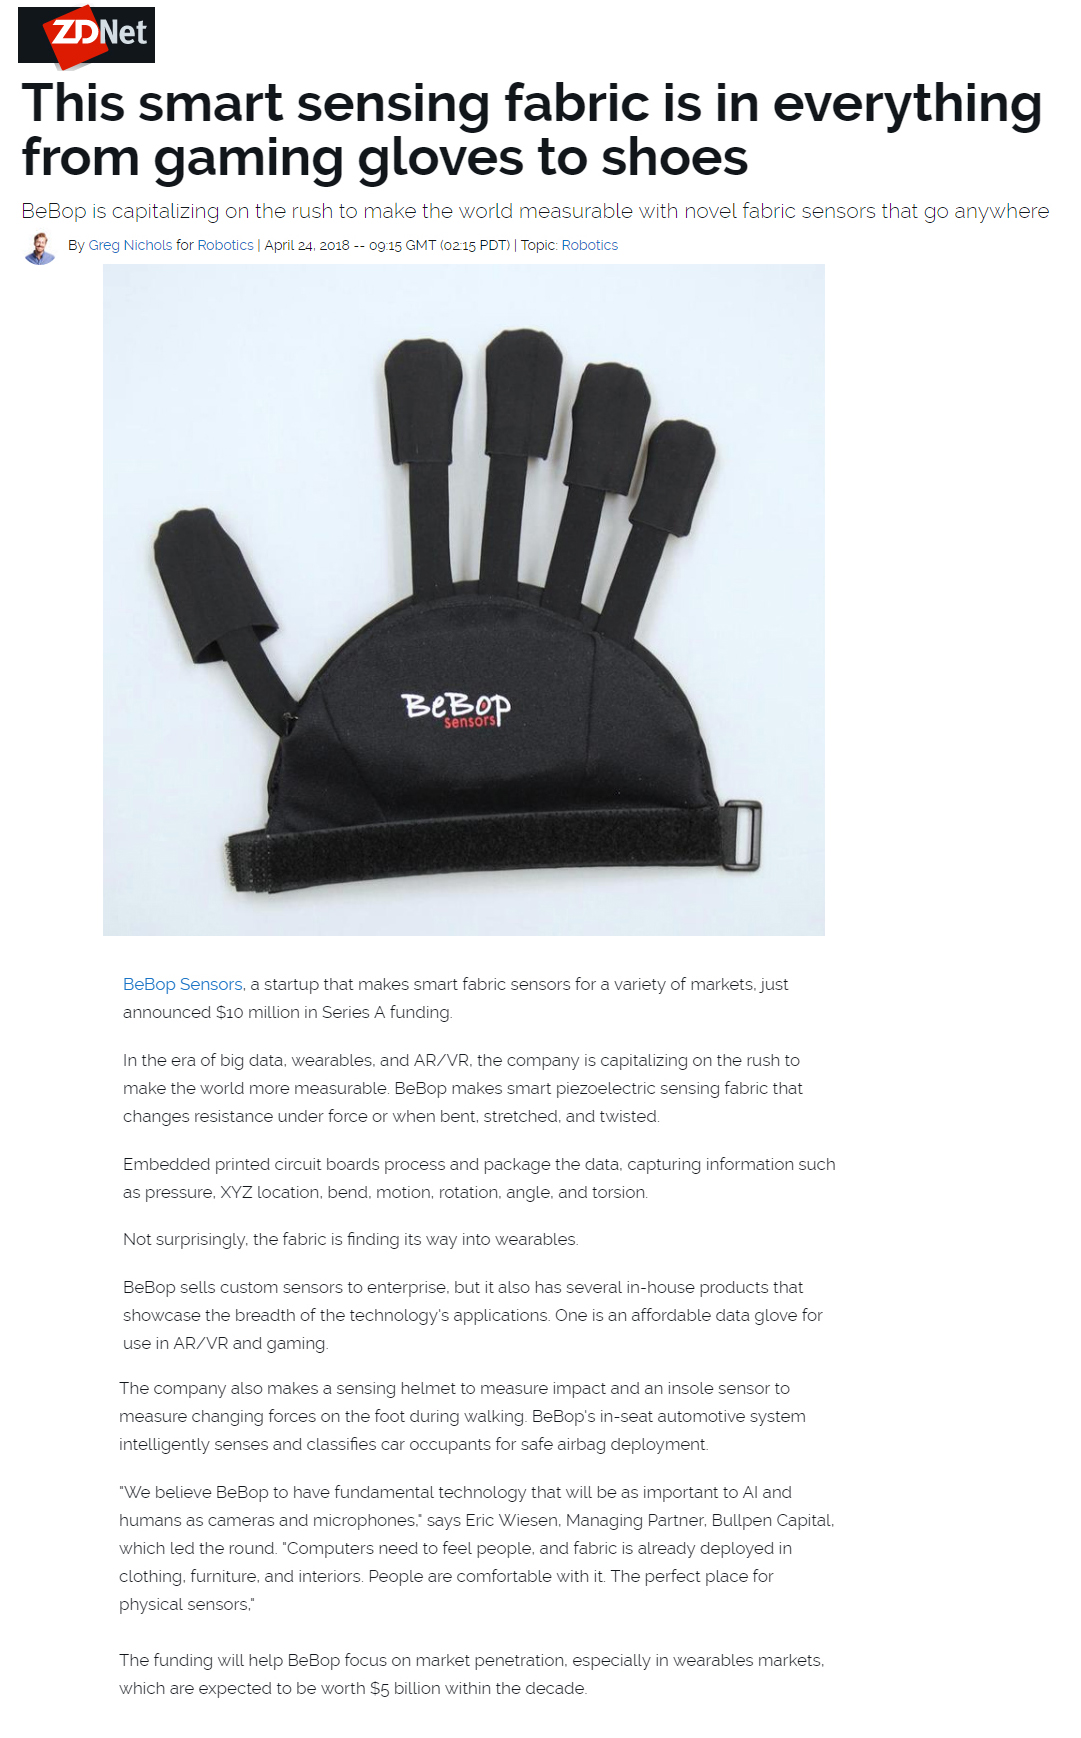 BeBop Sensors in ZDNet:  This smart sensing fabric is in everything from gaming gloves to shoesThe funding will help BeBop focus on market penetration, especially in wearables markets, which are expected to be worth $5 billion within the decade. - Greg Nichols, ZDNet 